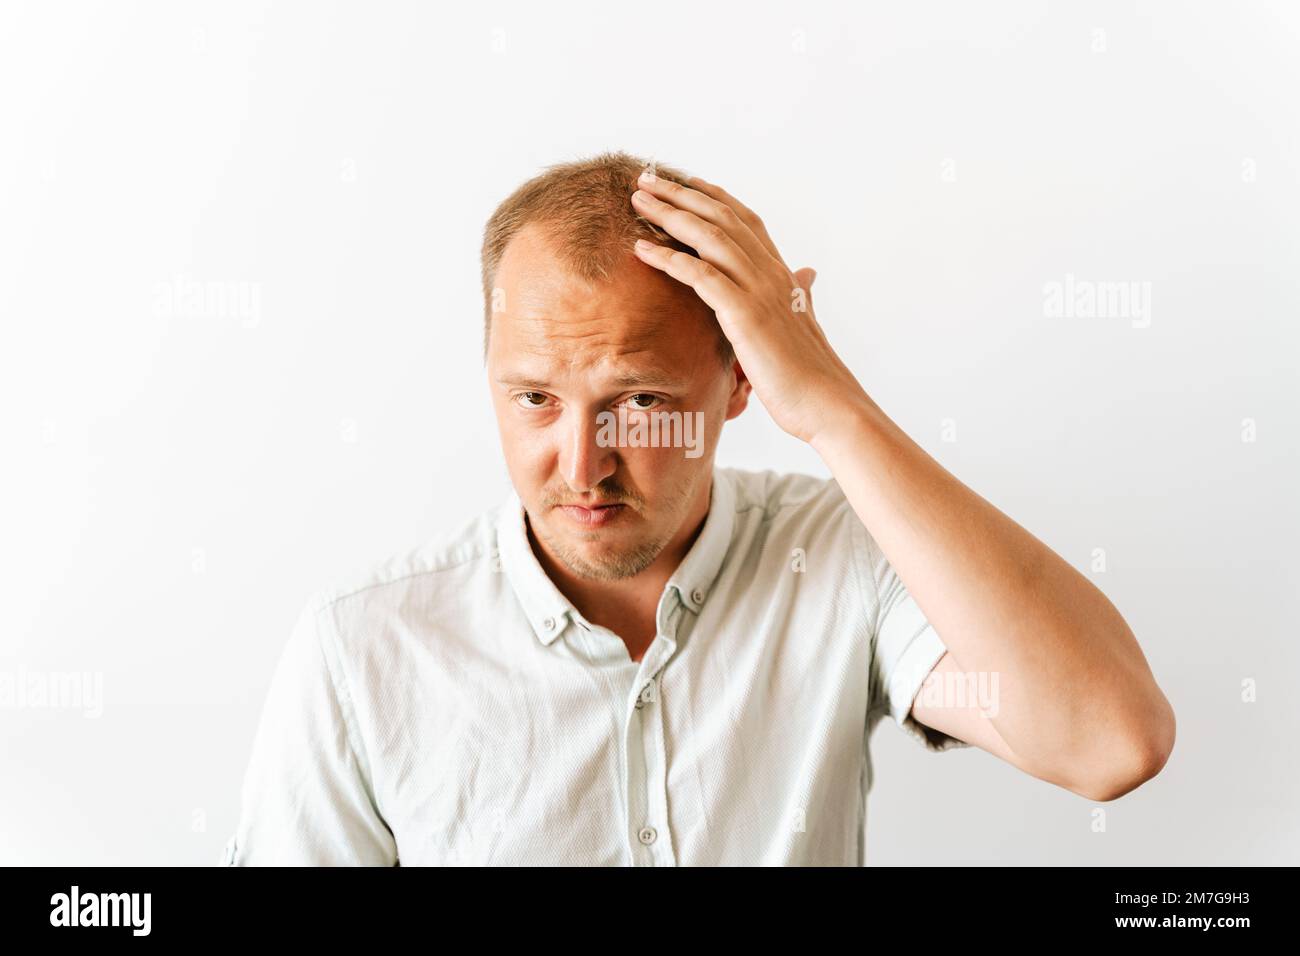 Before hair transplantation. Young sad bald man with depression at hair loss problems looking angry and frustrated and holding his head Stock Photo